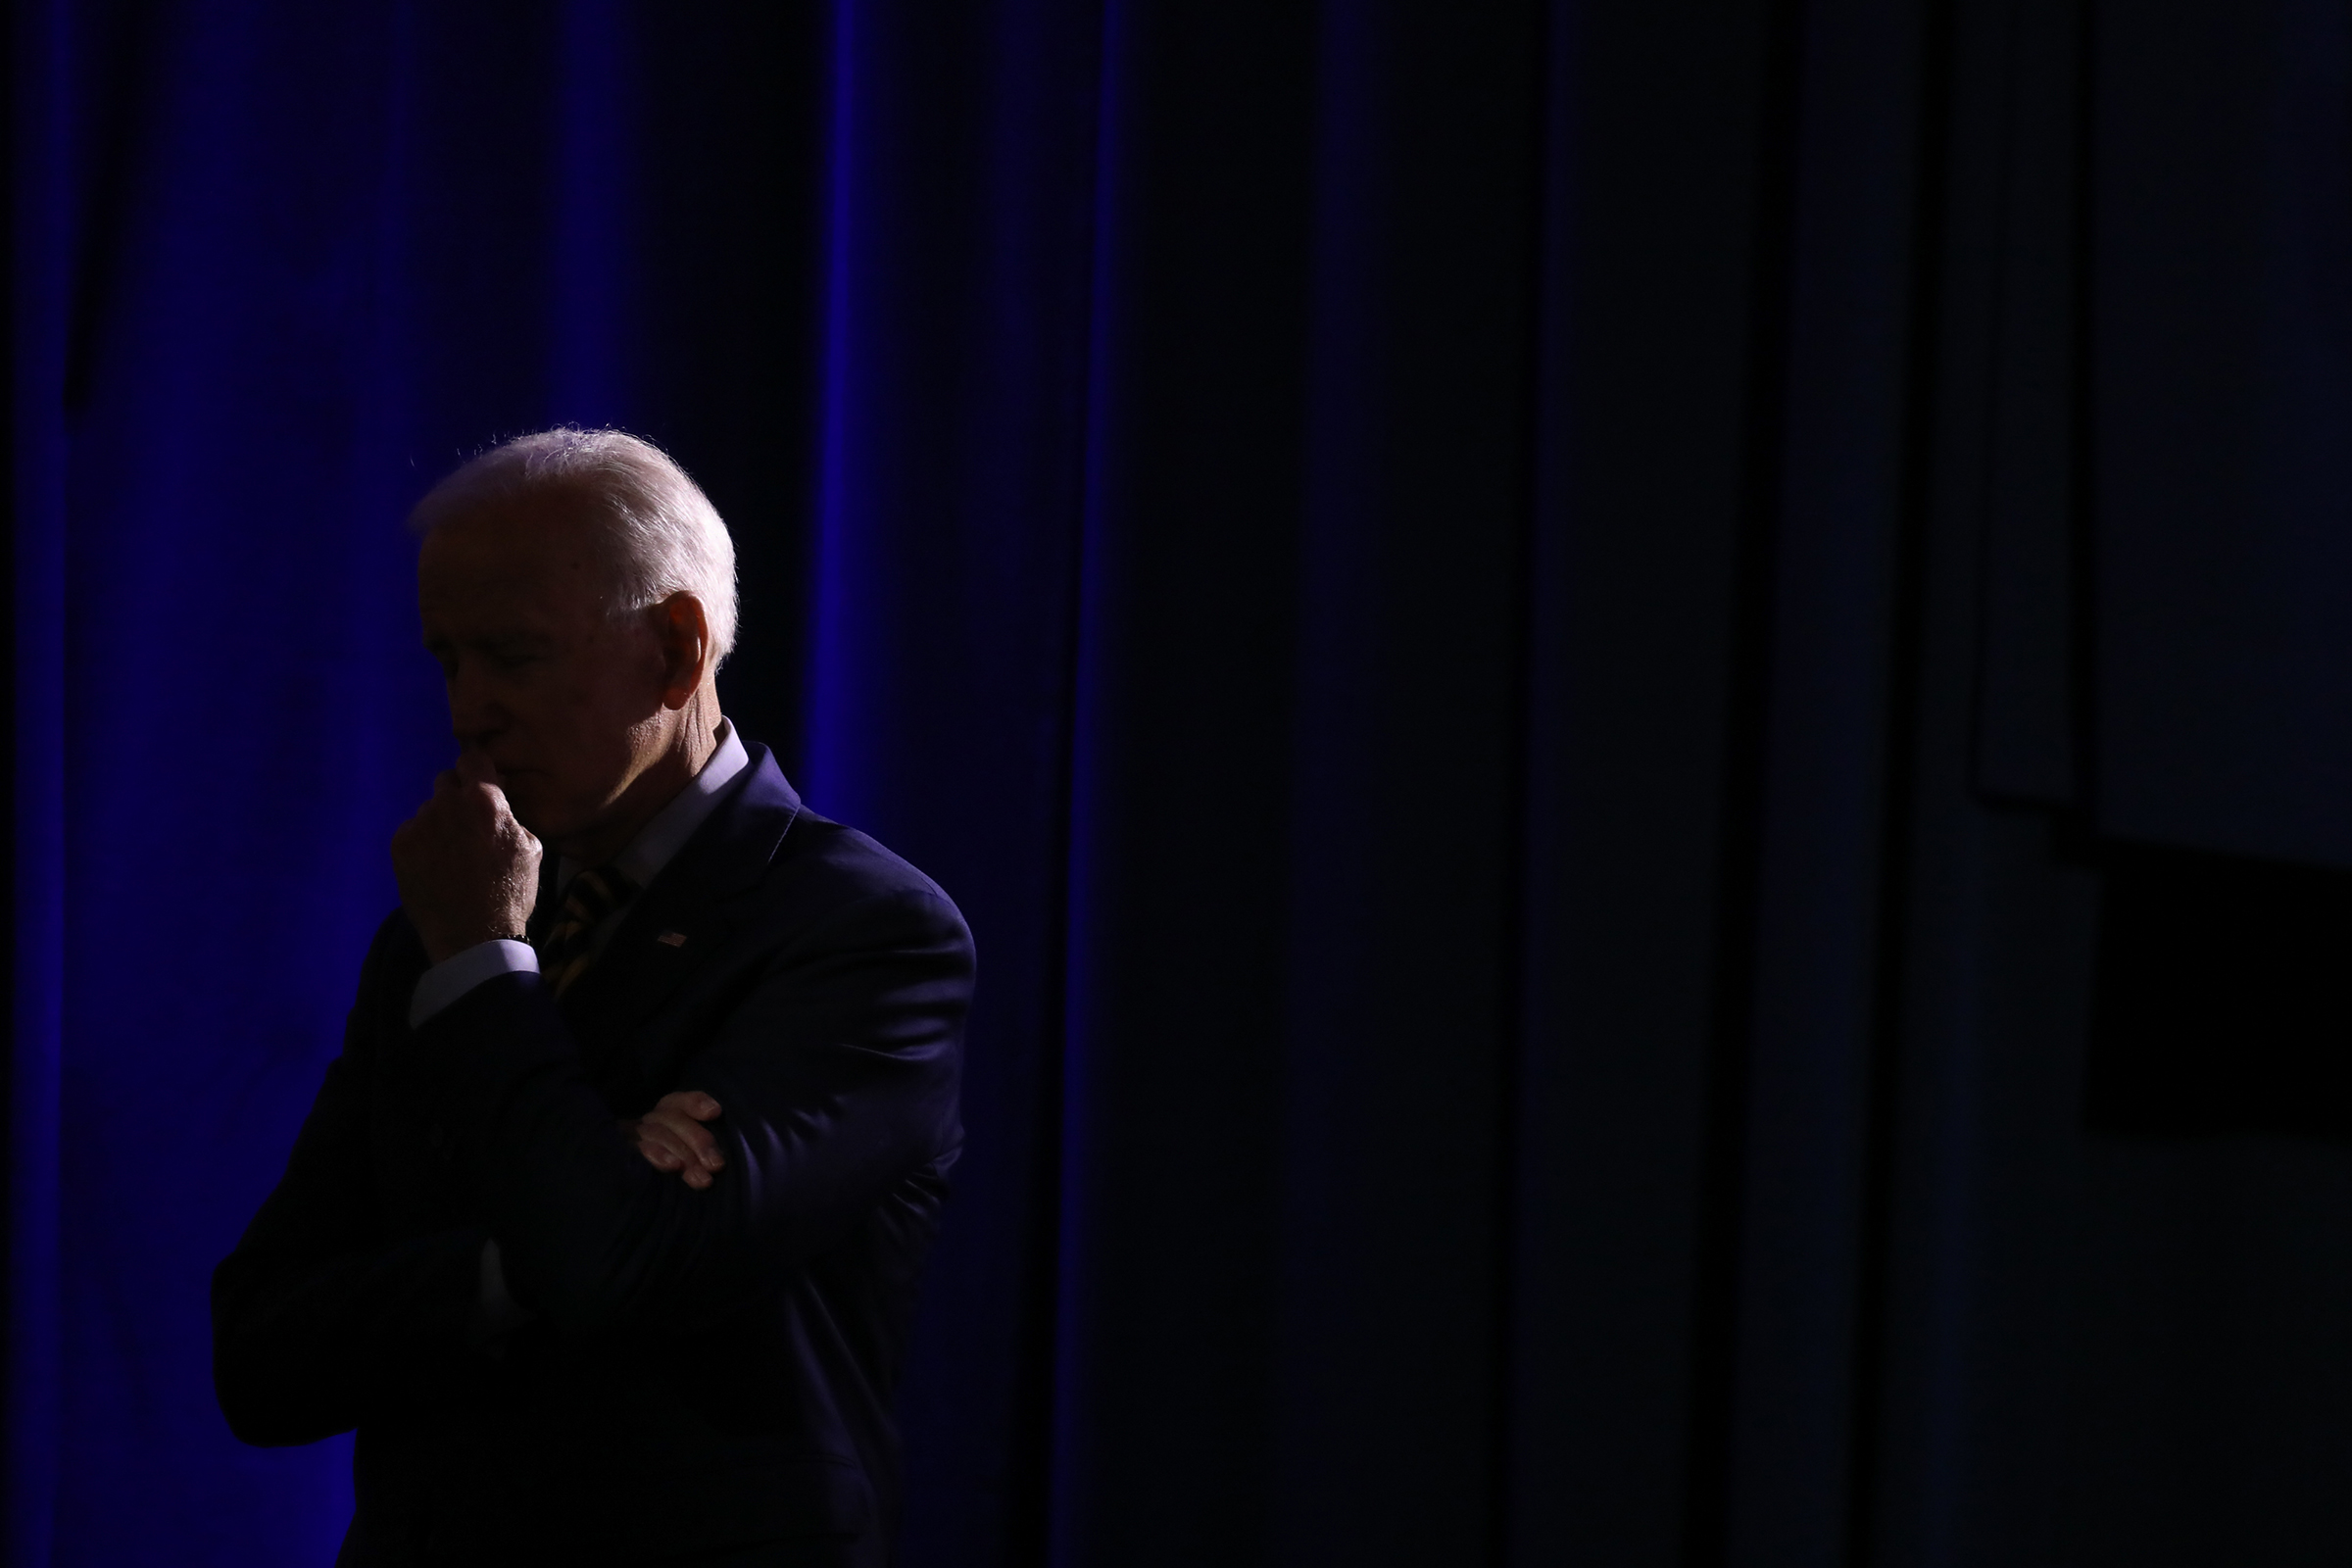 Joe Biden listens to an attendee at an election forum event in Columbia, S.C. on June 22, 2019 (Logan Cyrus—AFP/Getty Images)